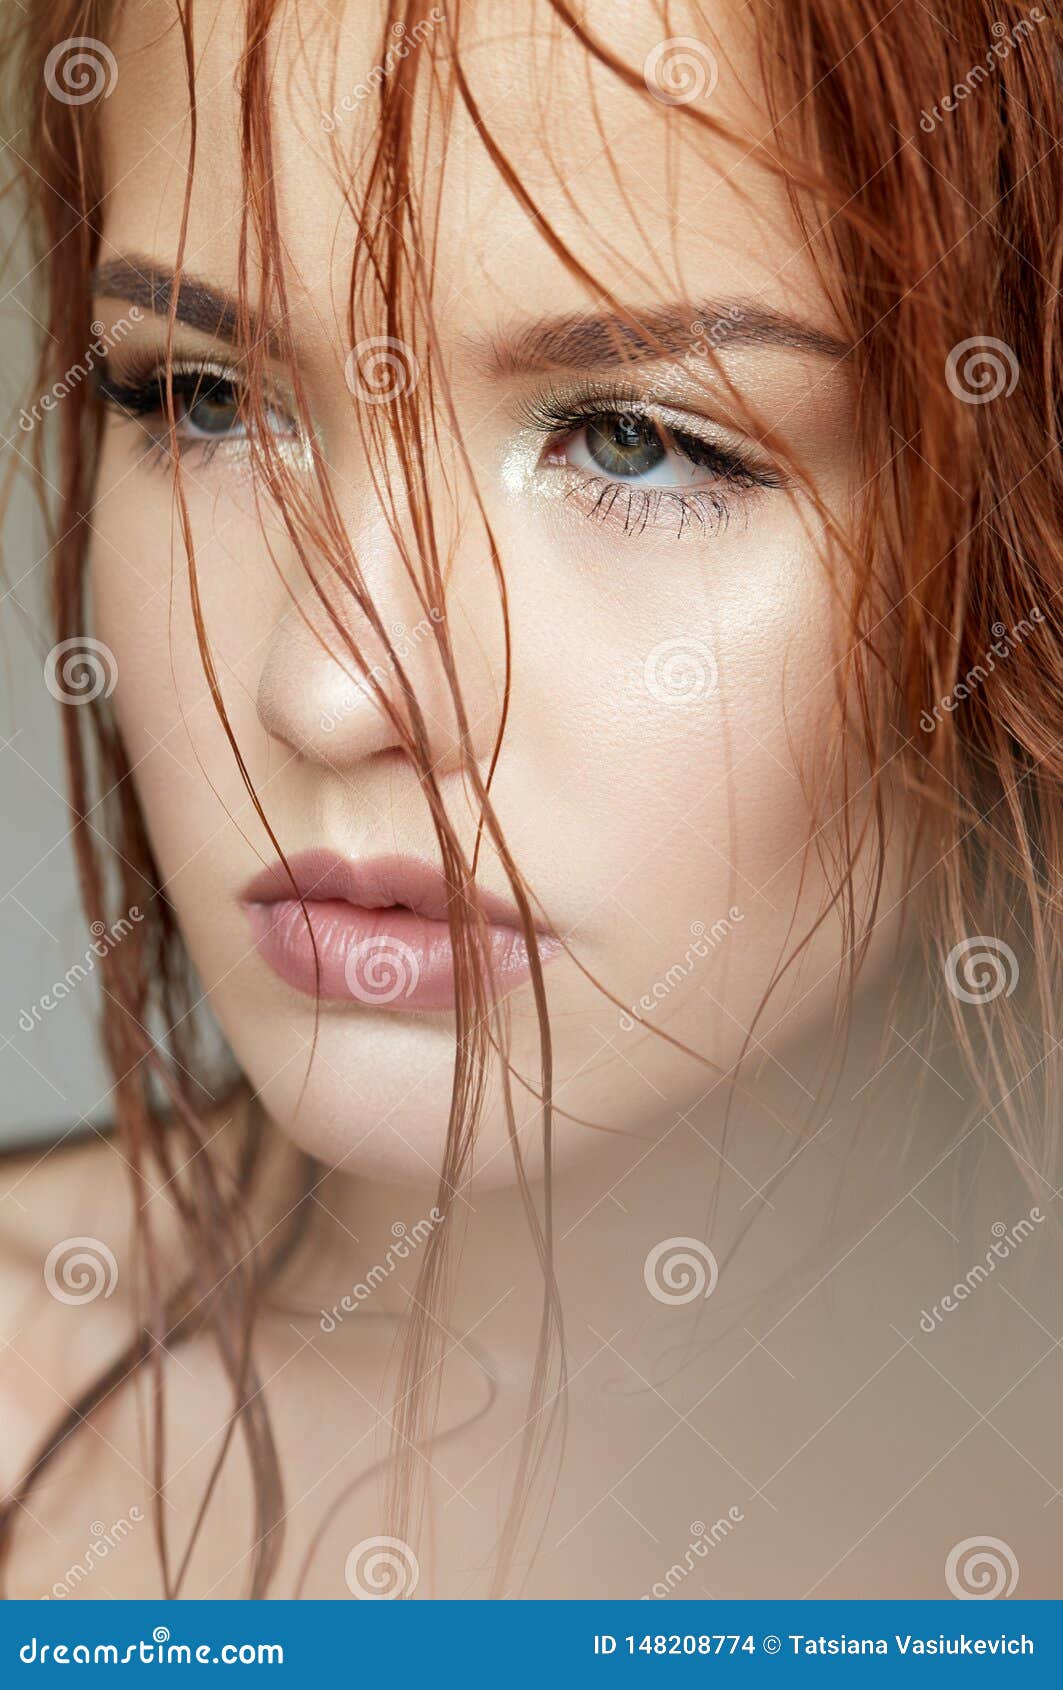 Young Girl In A Gentle Way And Red Hair Beautiful Model With Shining 